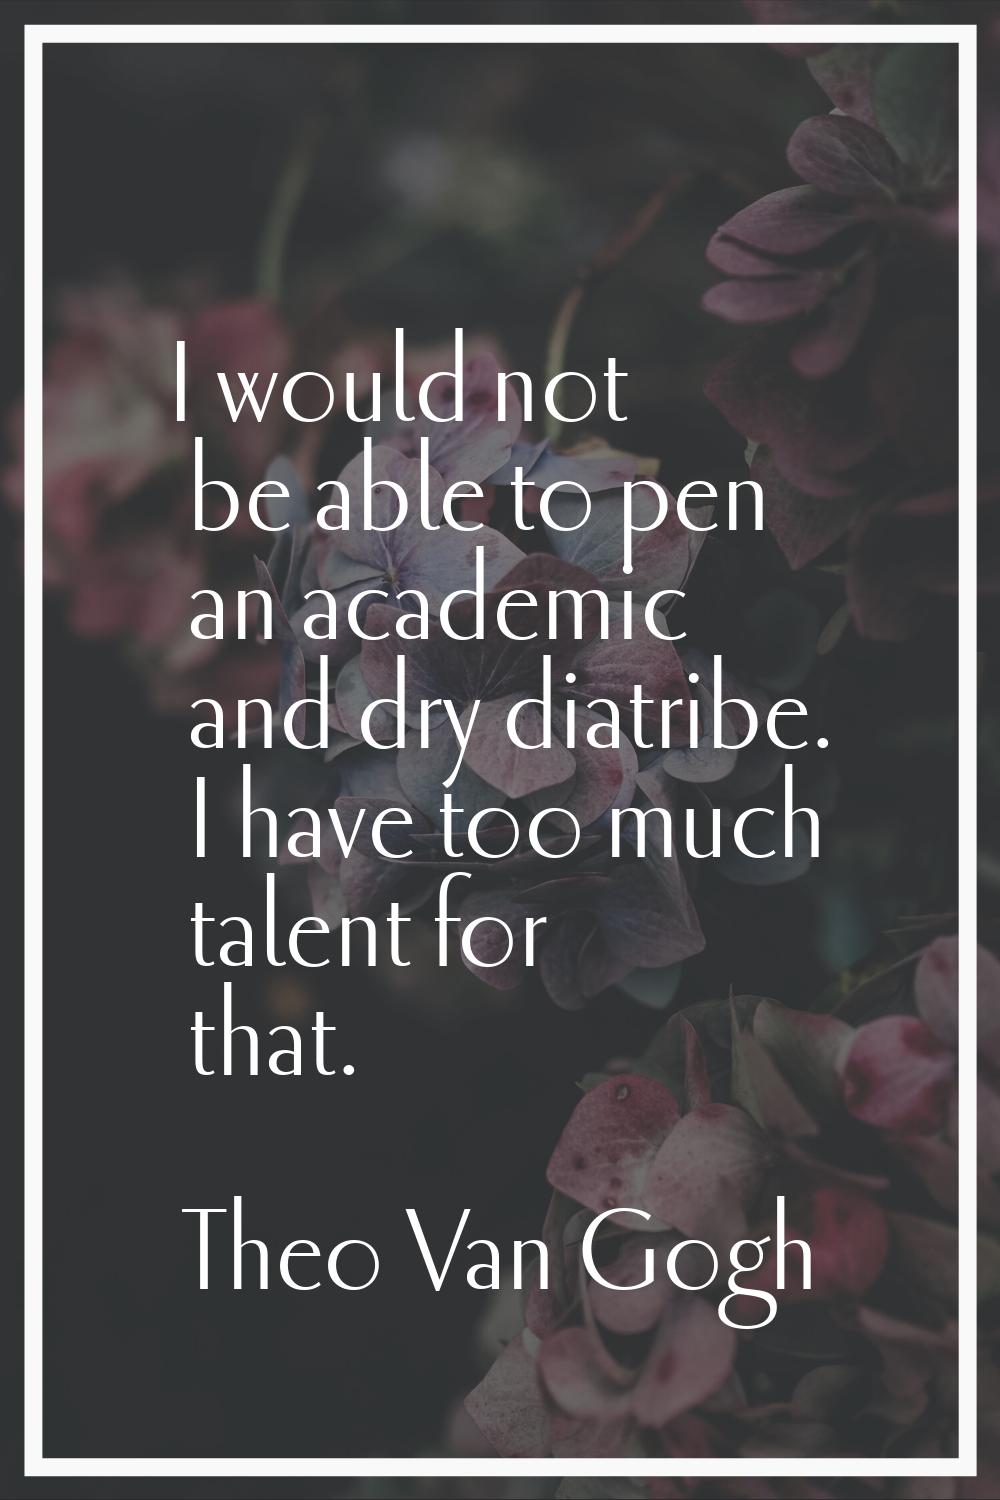 I would not be able to pen an academic and dry diatribe. I have too much talent for that.